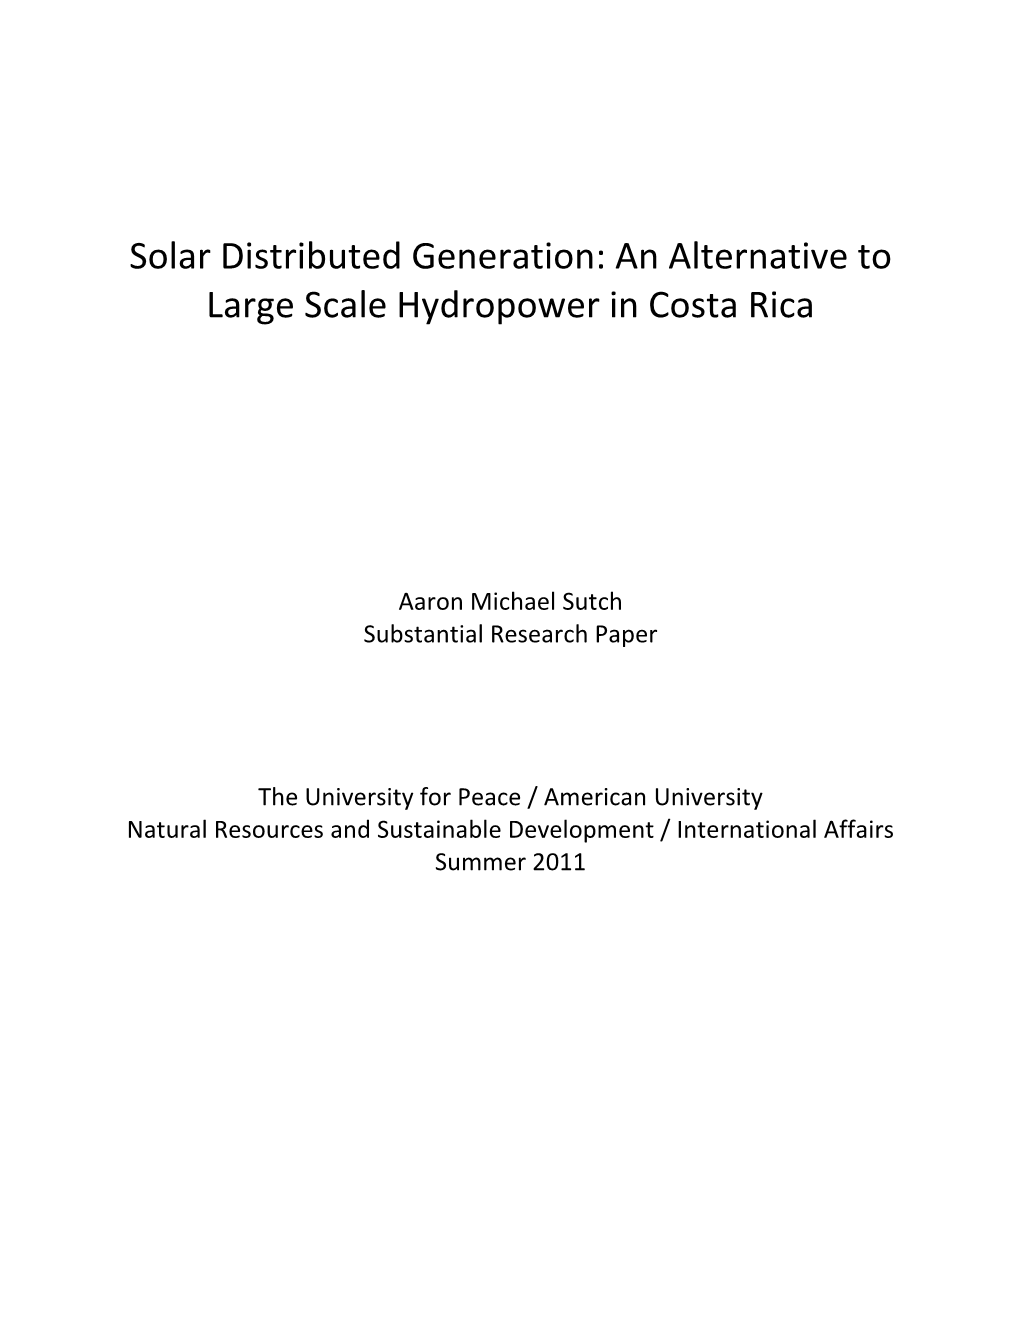 Solar Distributed Generation: an Alternative to Large Scale Hydropower in Costa Rica